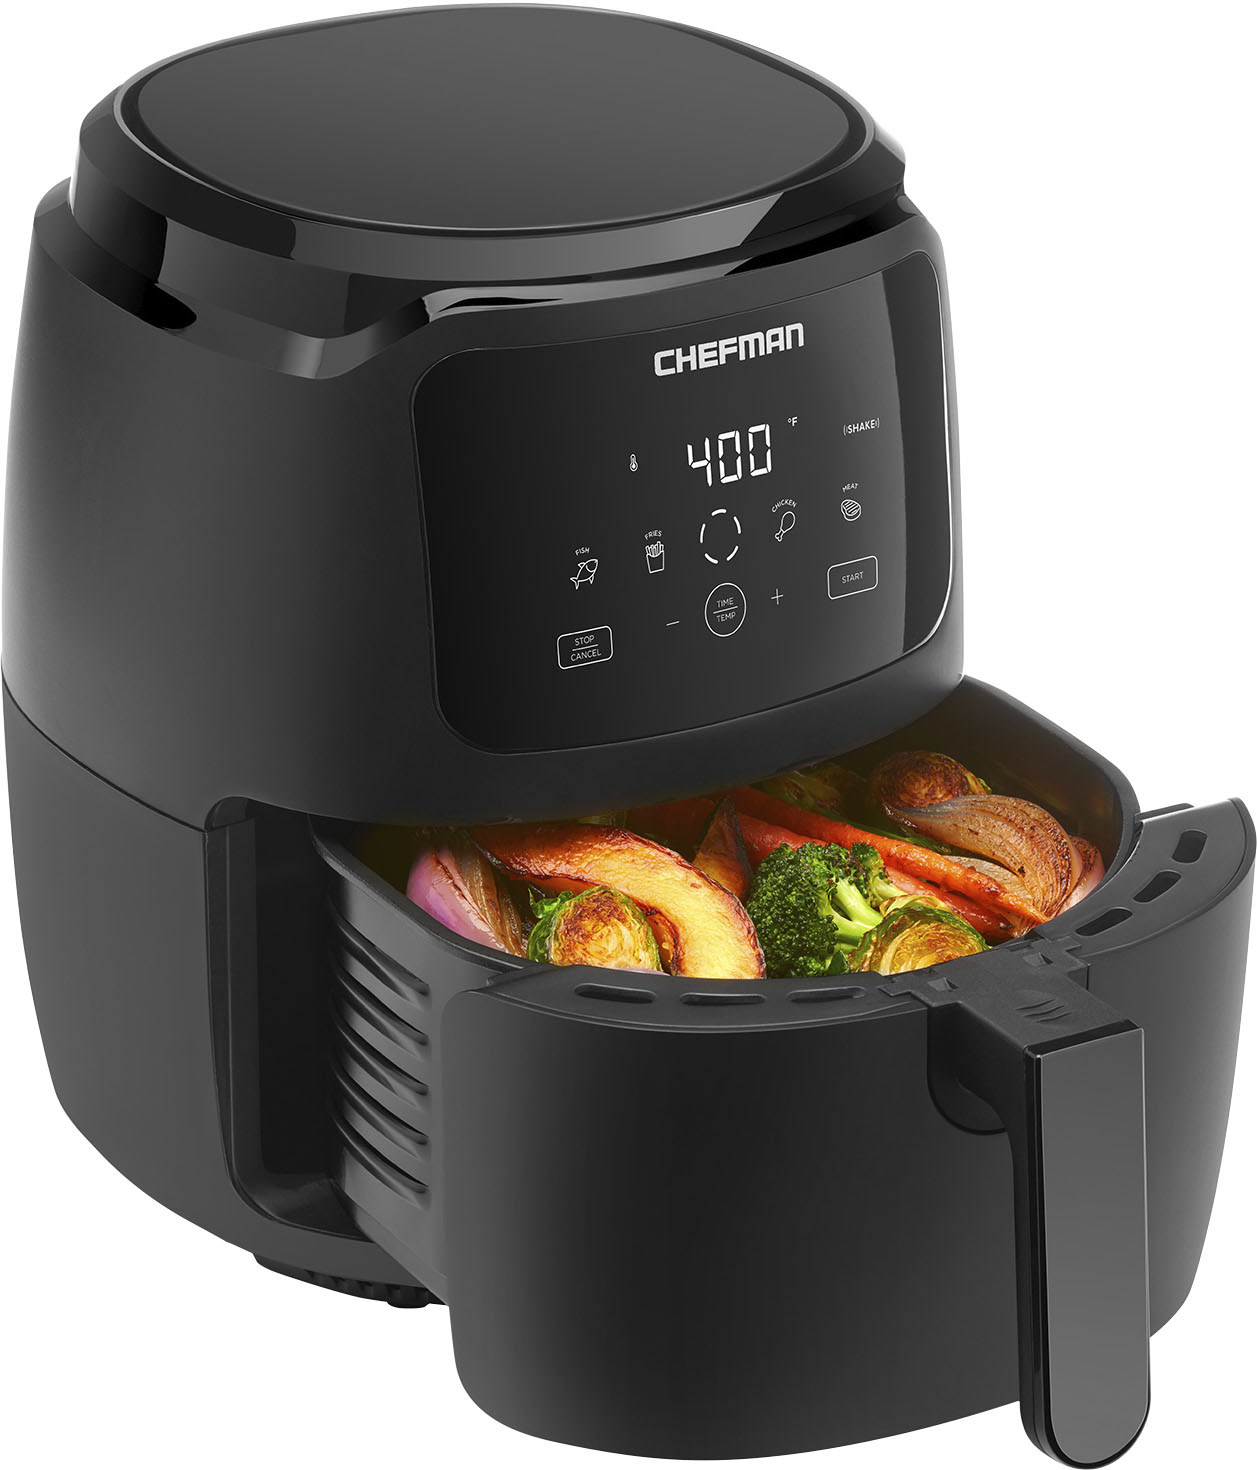 Angle View: Chefman Family Size 5 Qt. Digital Air Fryer with 4 Cooking Presets - Black